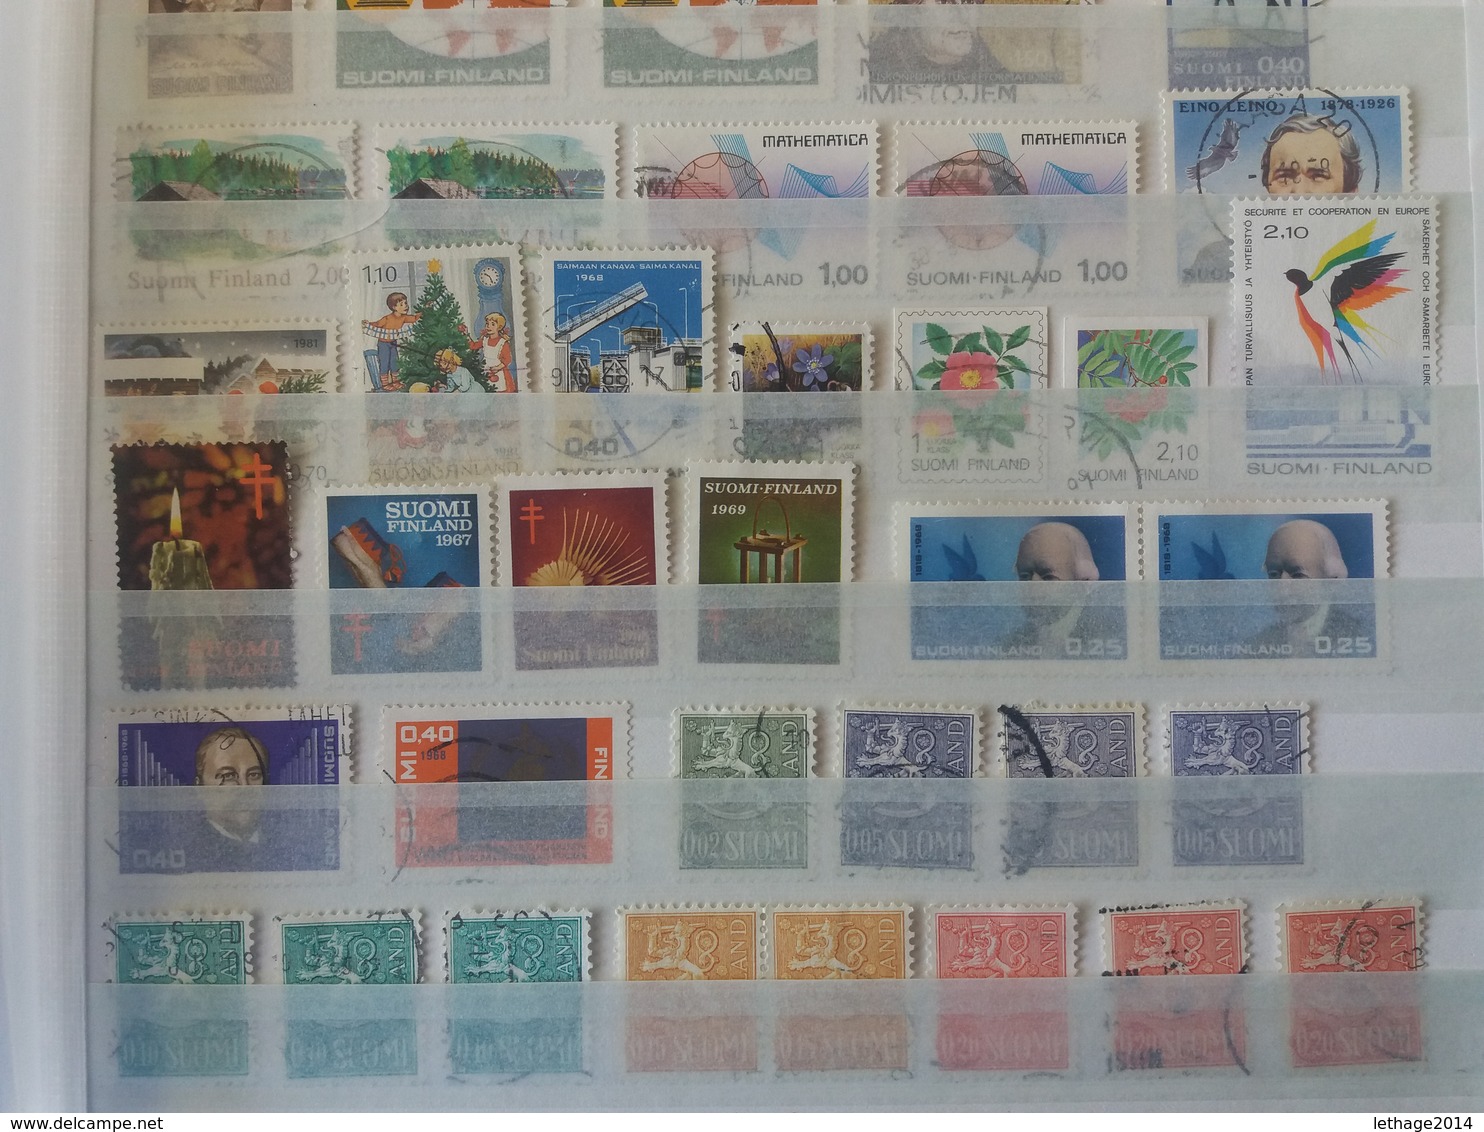 STAMPS SUOMI FINLAND Финляндия FINLANDIA FROM 1875 TO 1995 BIG STOCK 16 PHOTO